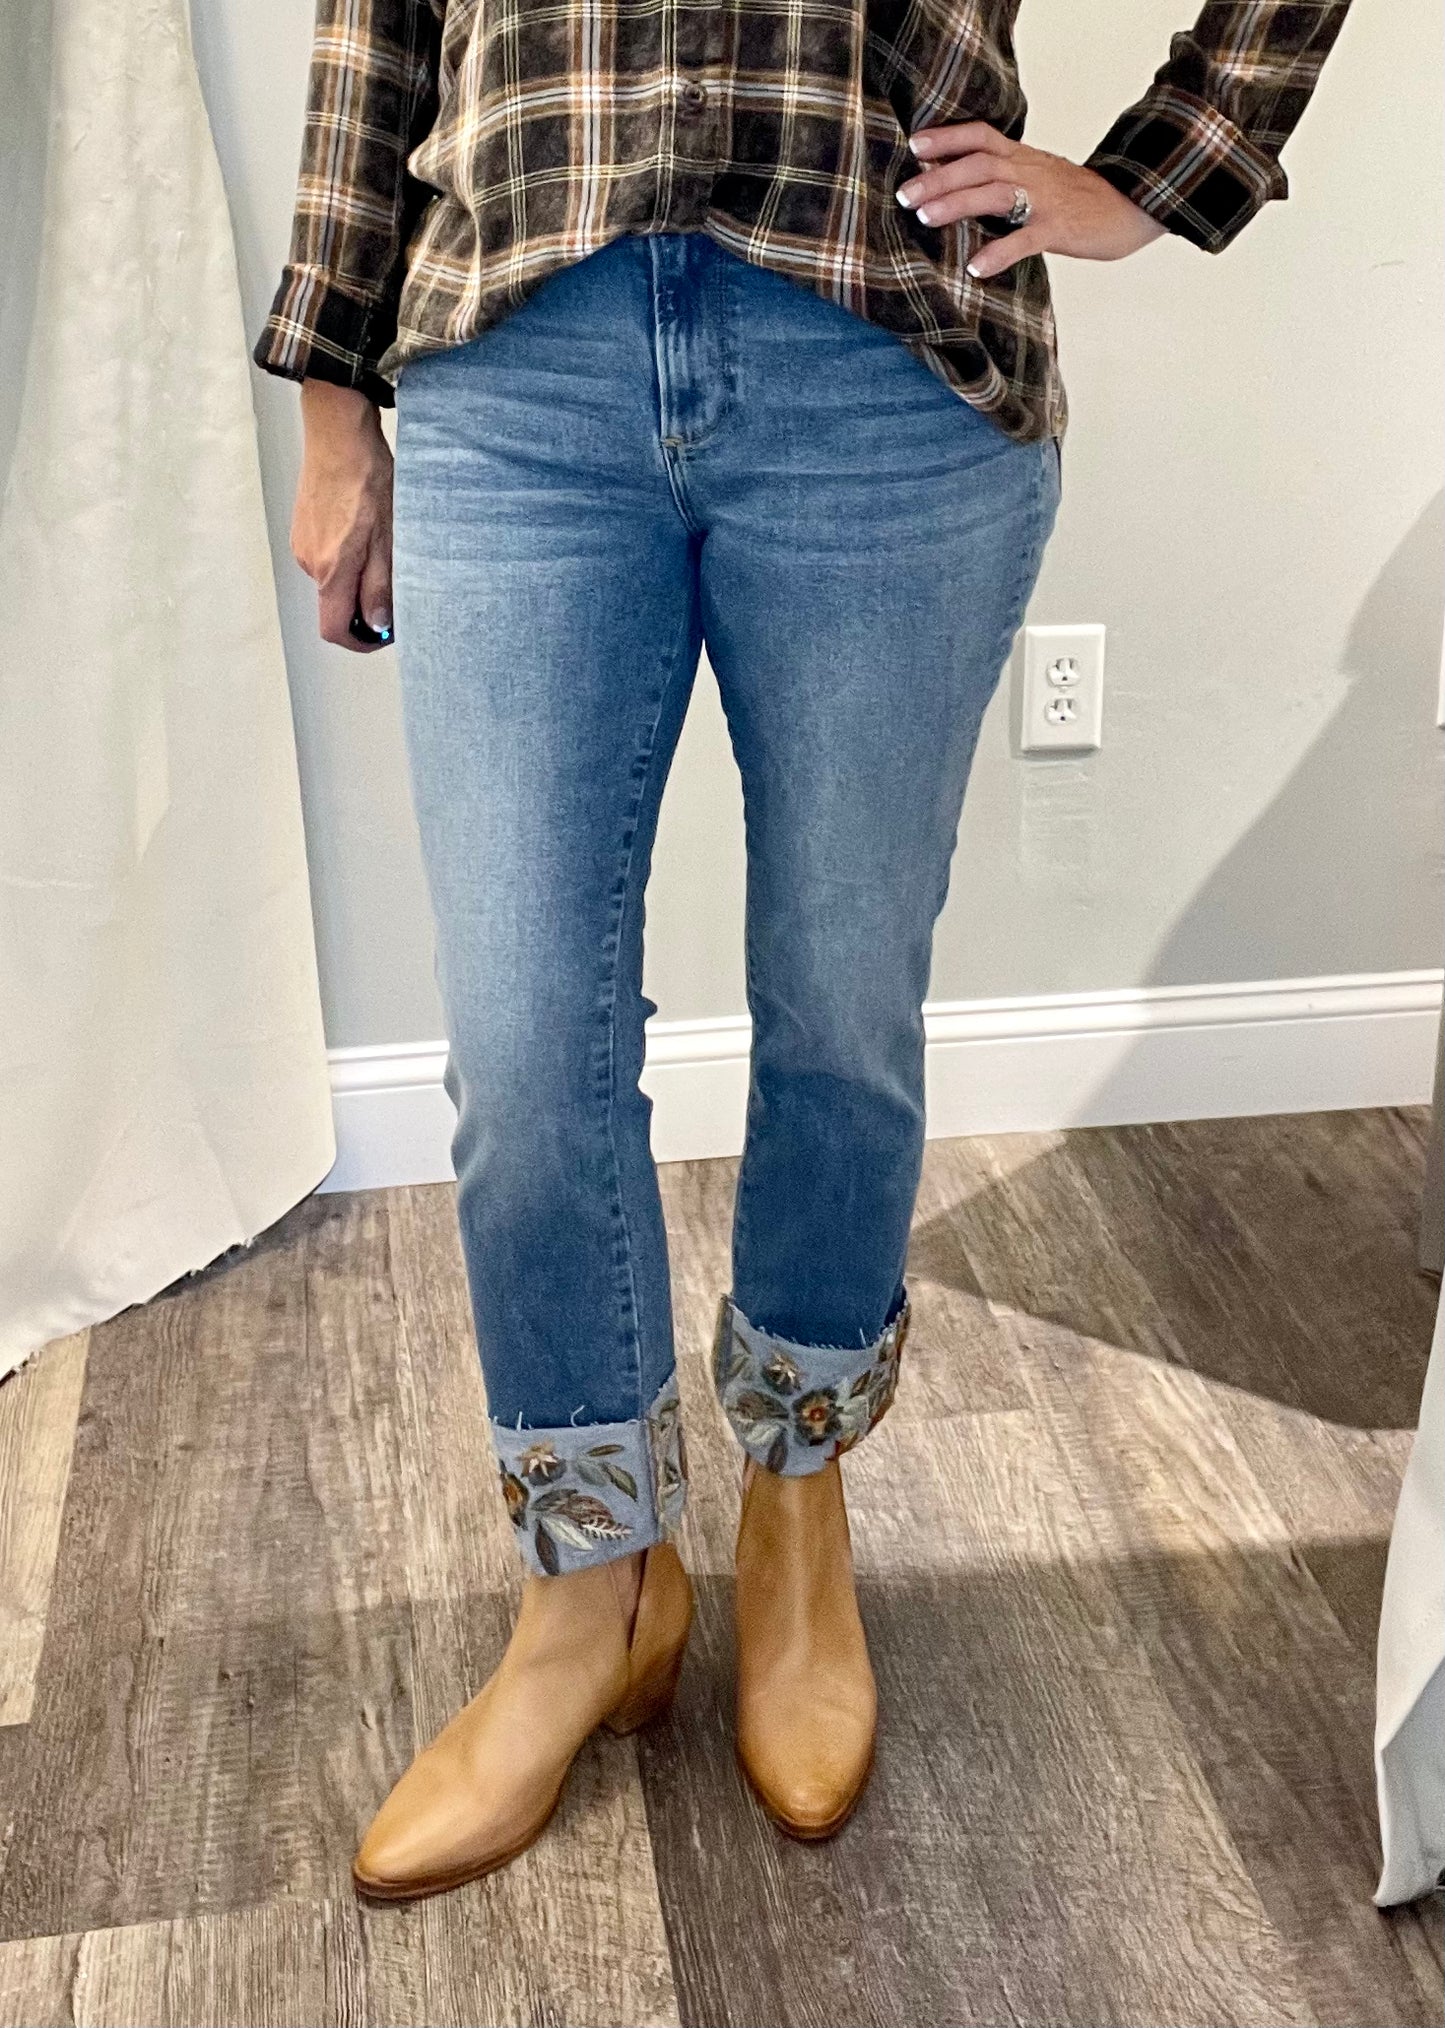 Driftwood Colette in Falling Floral Jeans